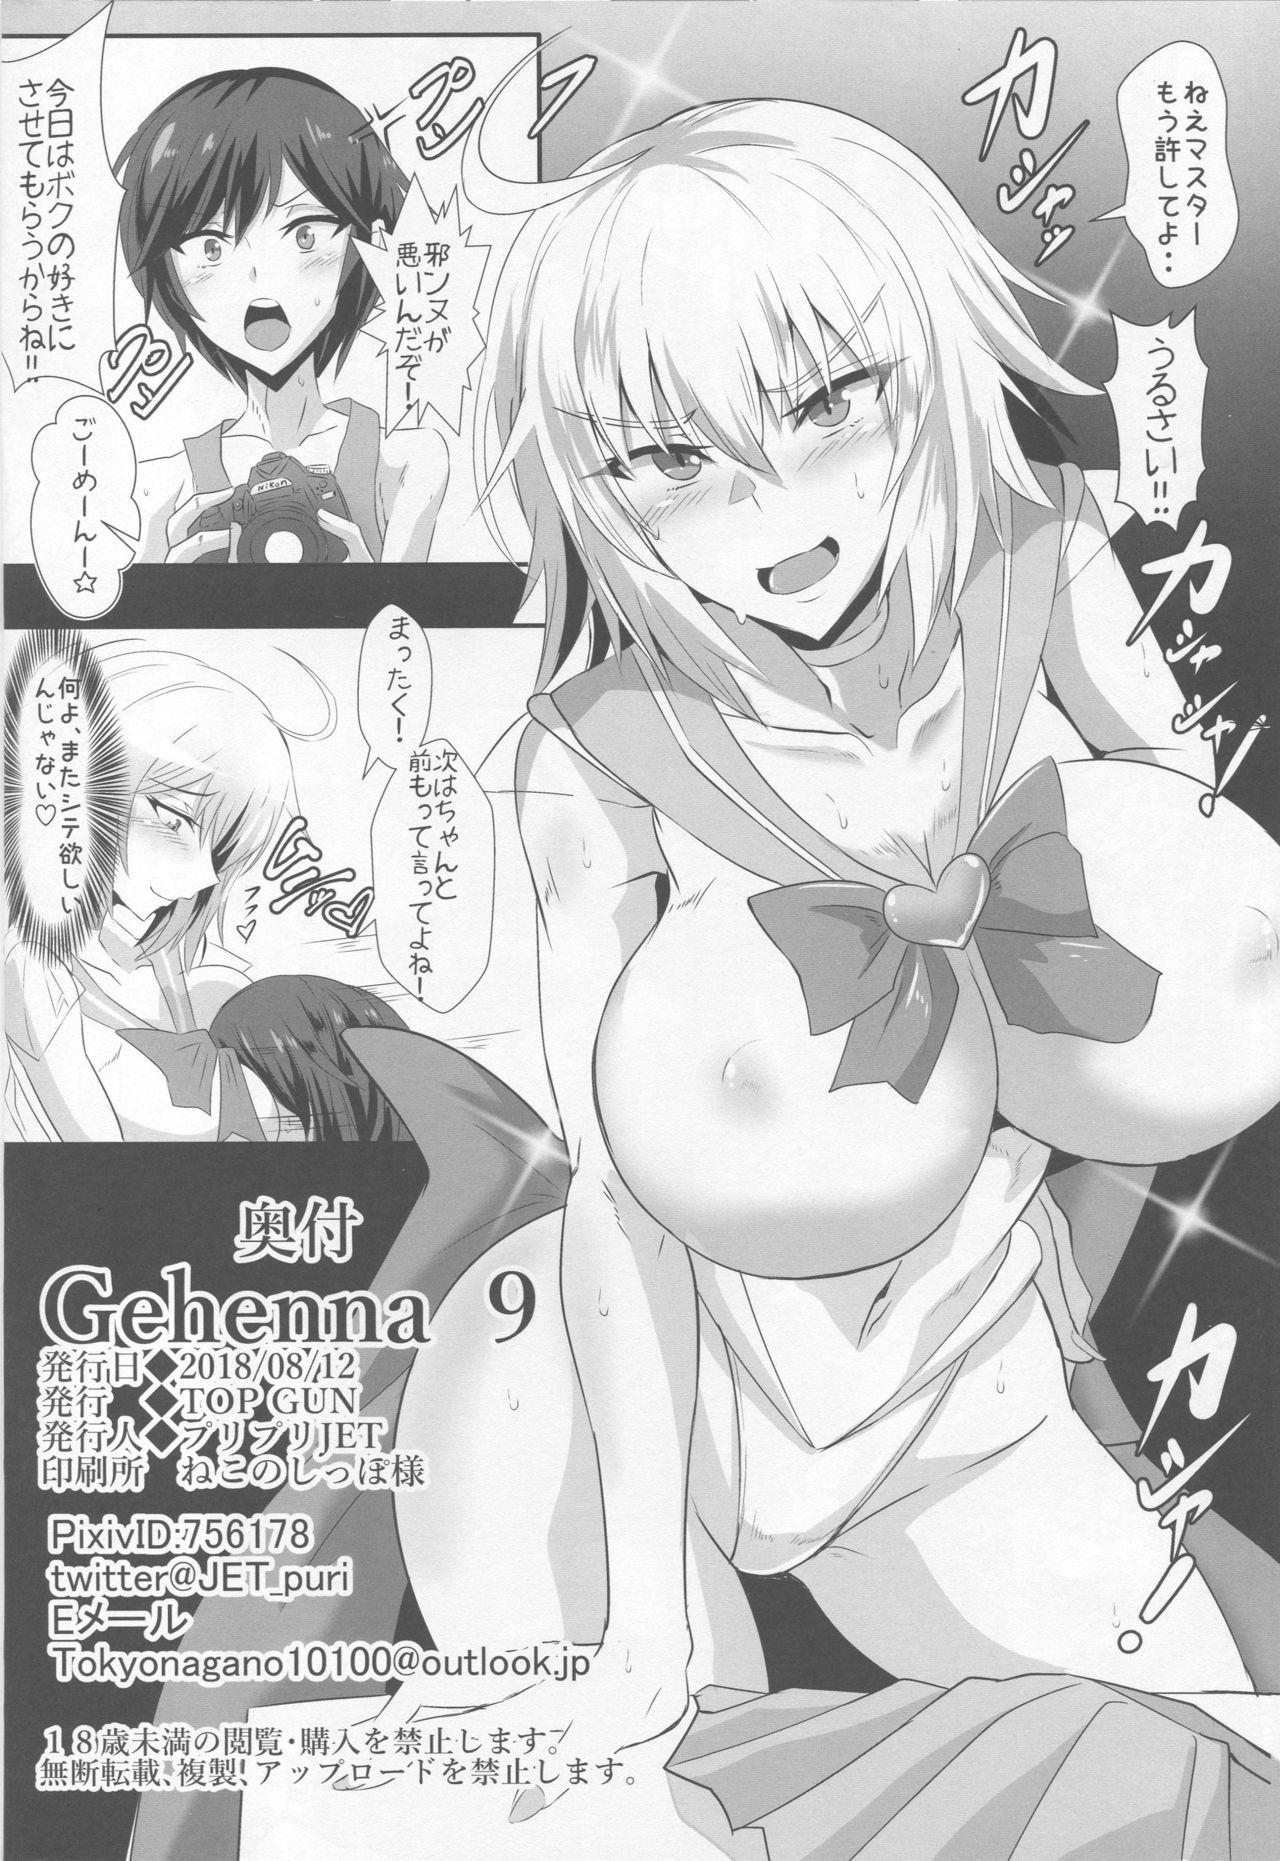 Pounding Gehenna 9 - Fate grand order Hugetits - Page 29